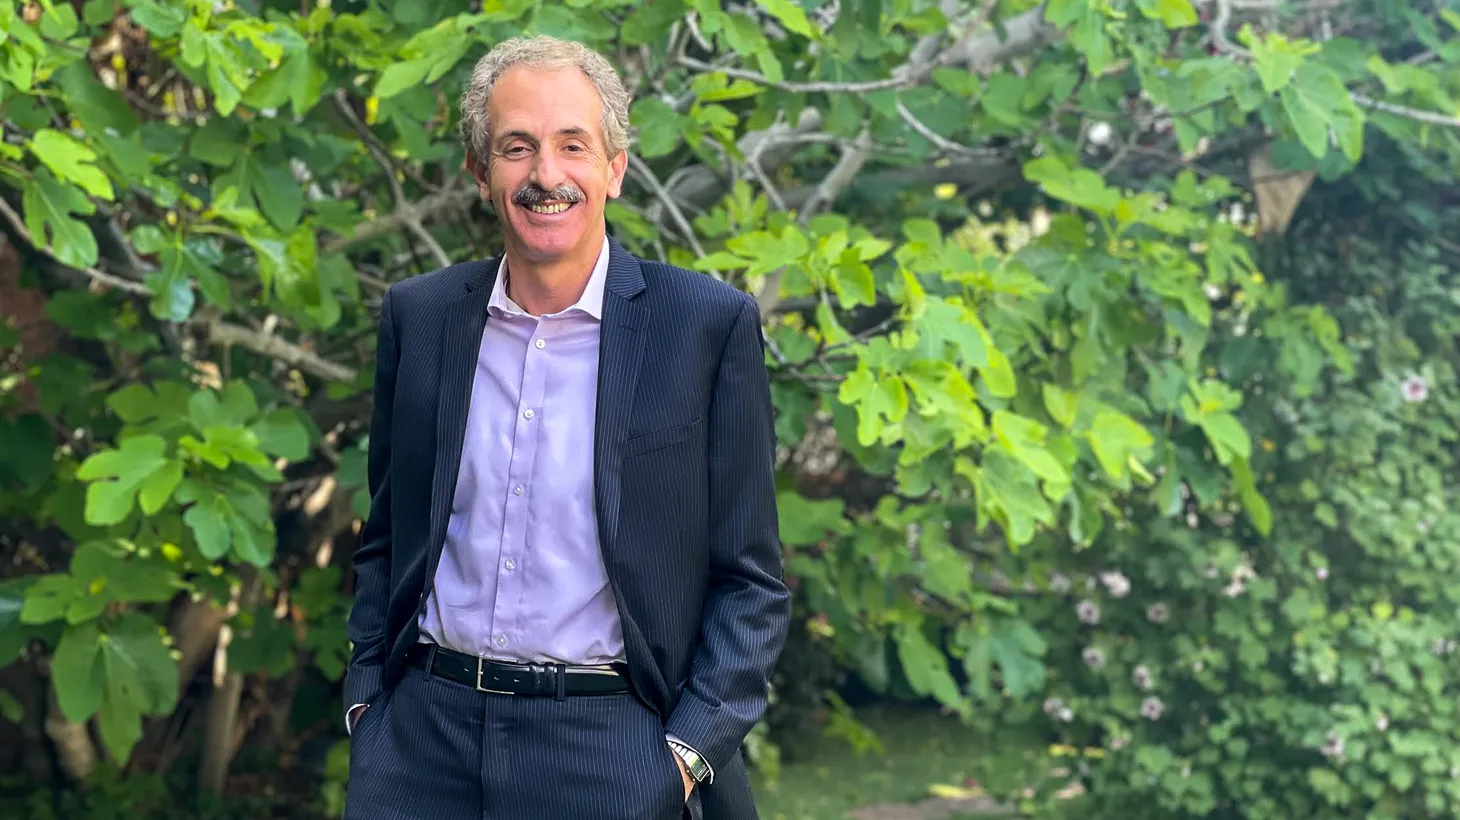 LA City Attorney Mike Feuer appears at his home, March 30, 2022. “There's a real hunger in our community for leaders who have the attributes I described: who take responsibility, who act assertively, and are a force for good in our city. I've been those things and I'll be those things as mayor,” he says.